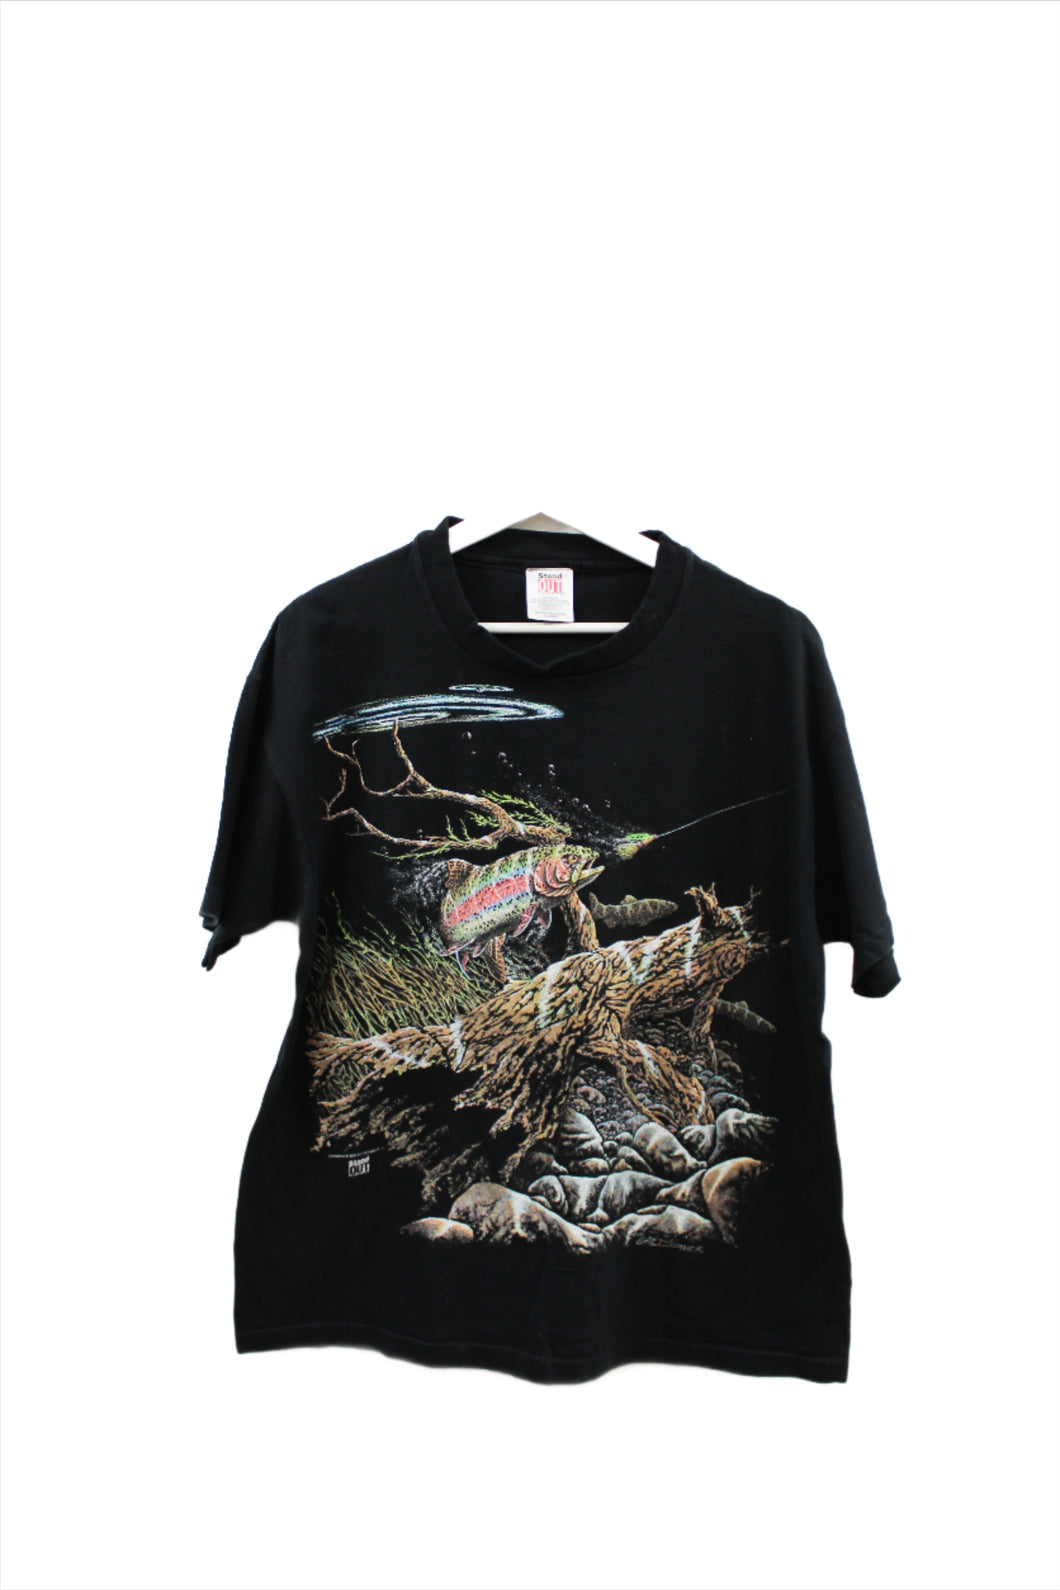 X - Vintage Single Stitch Fish In River Tee